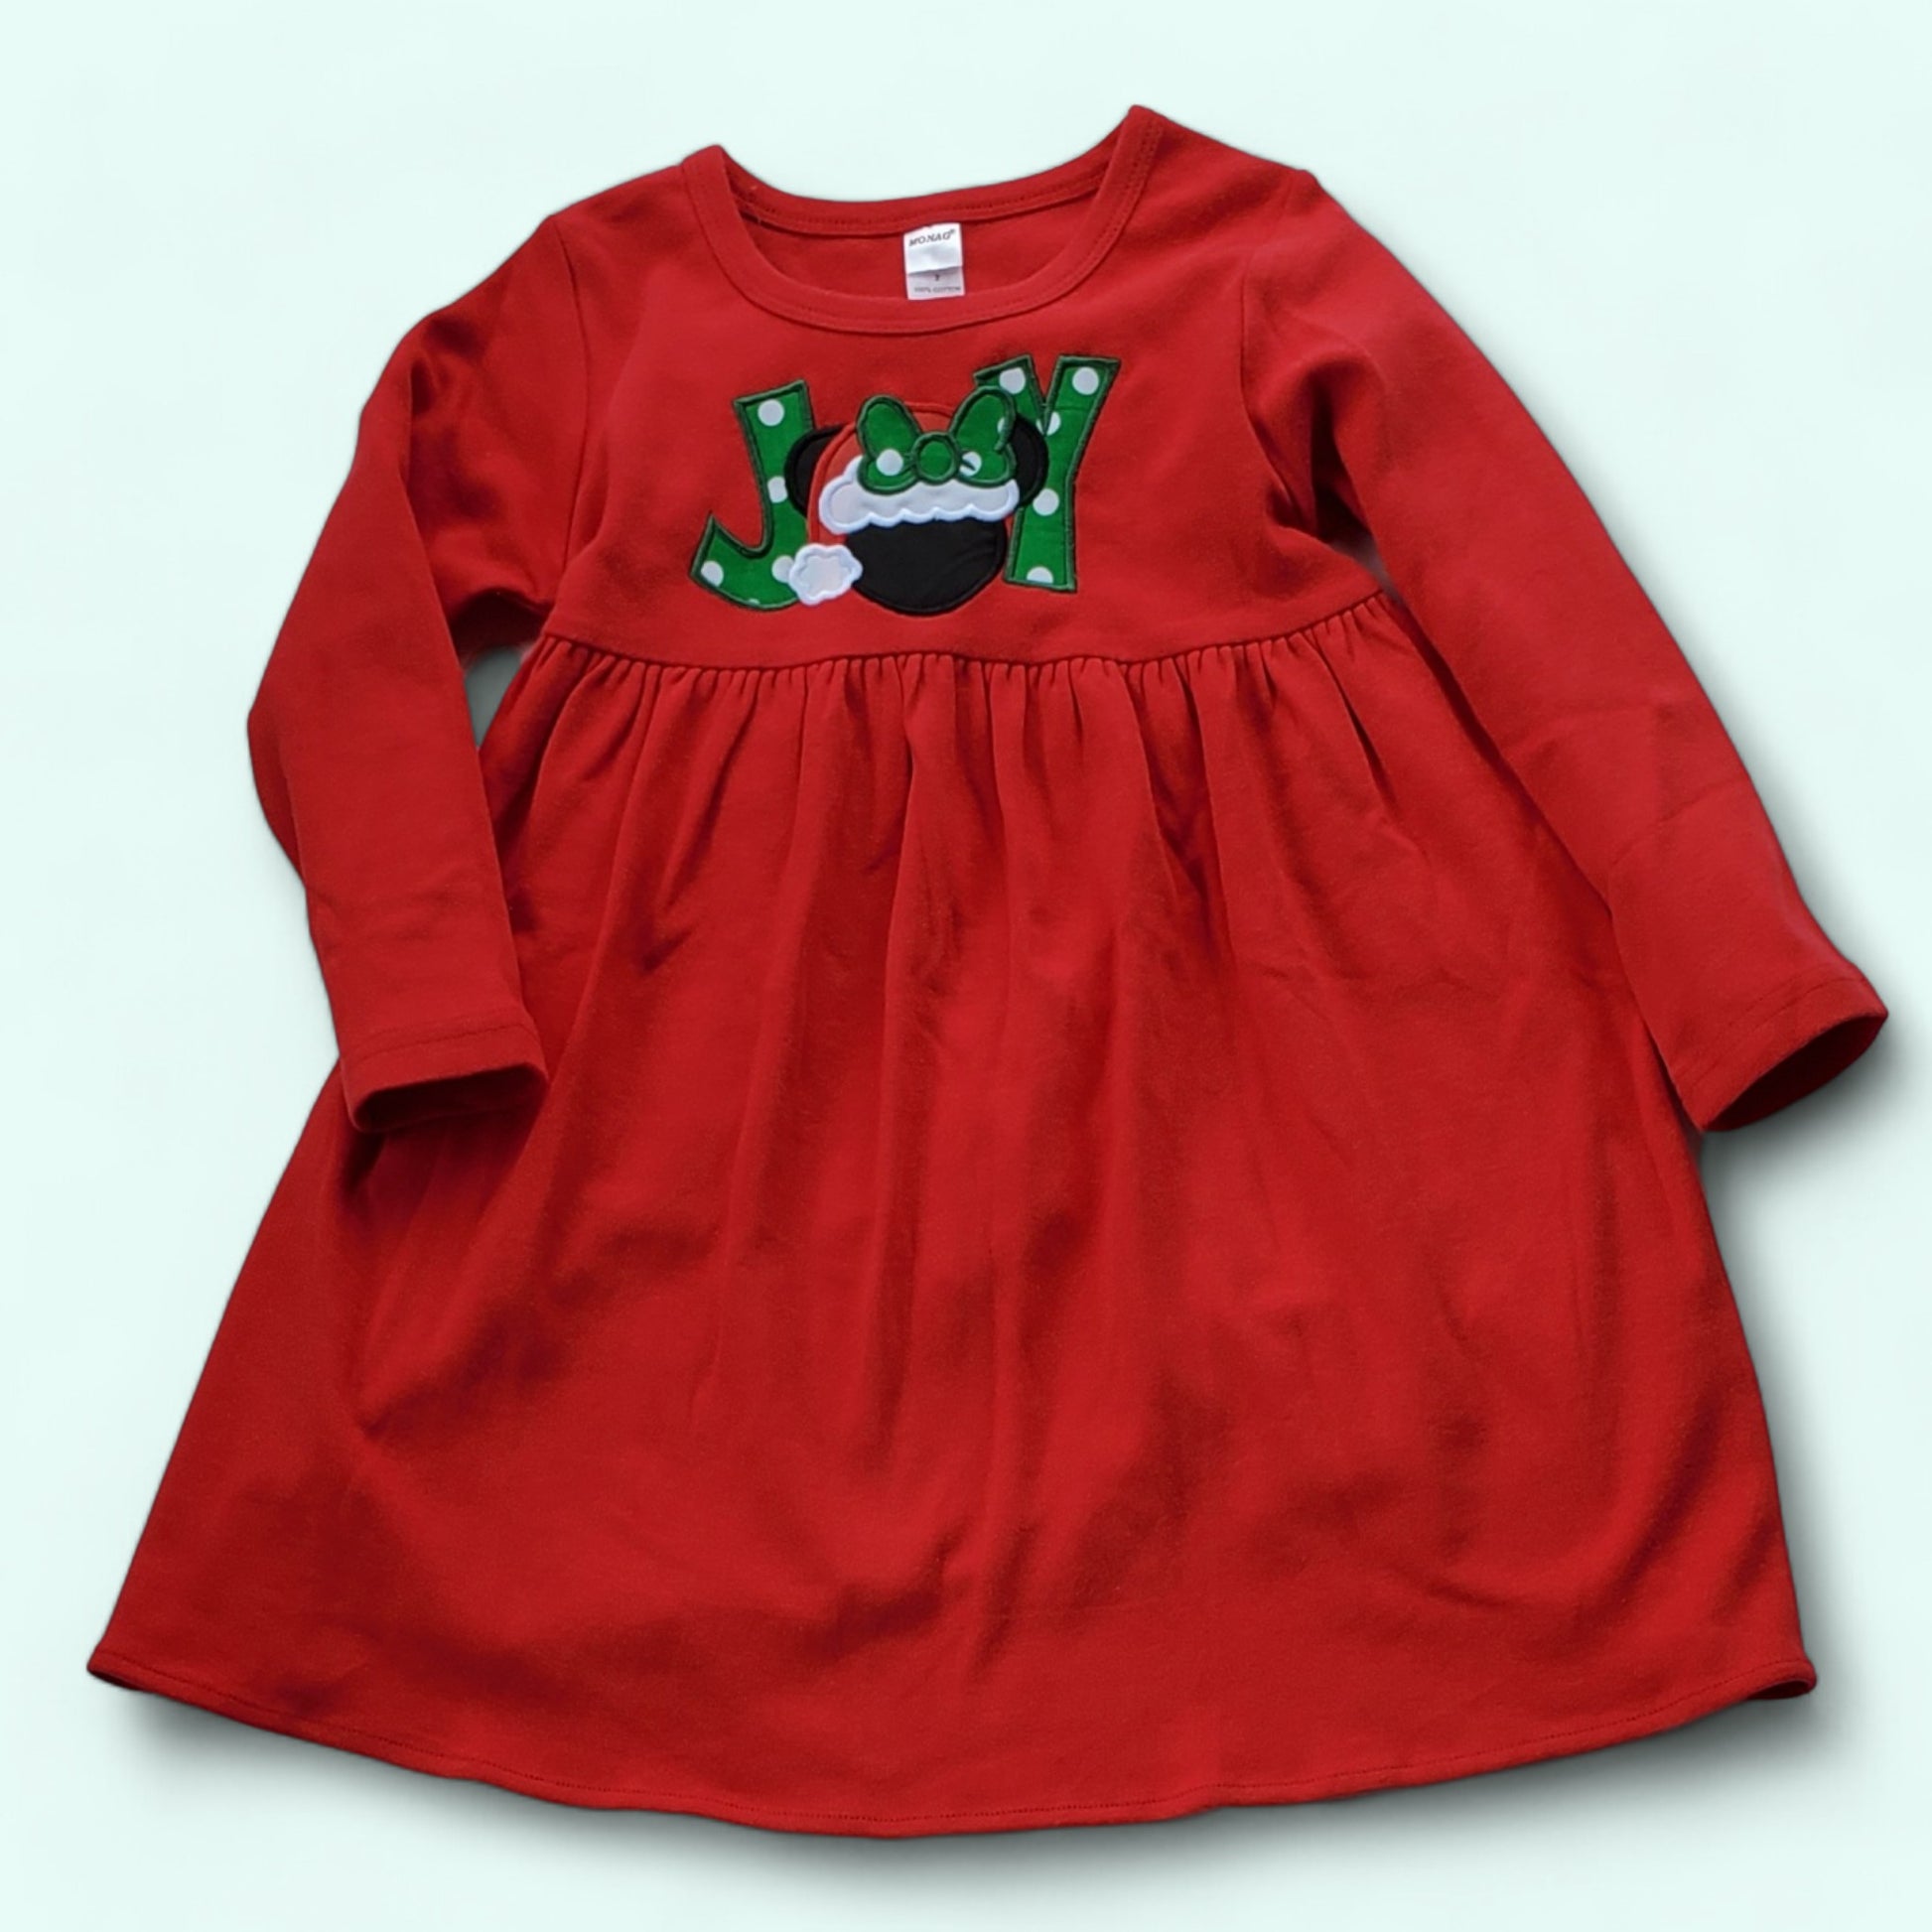 red Christmas dress front